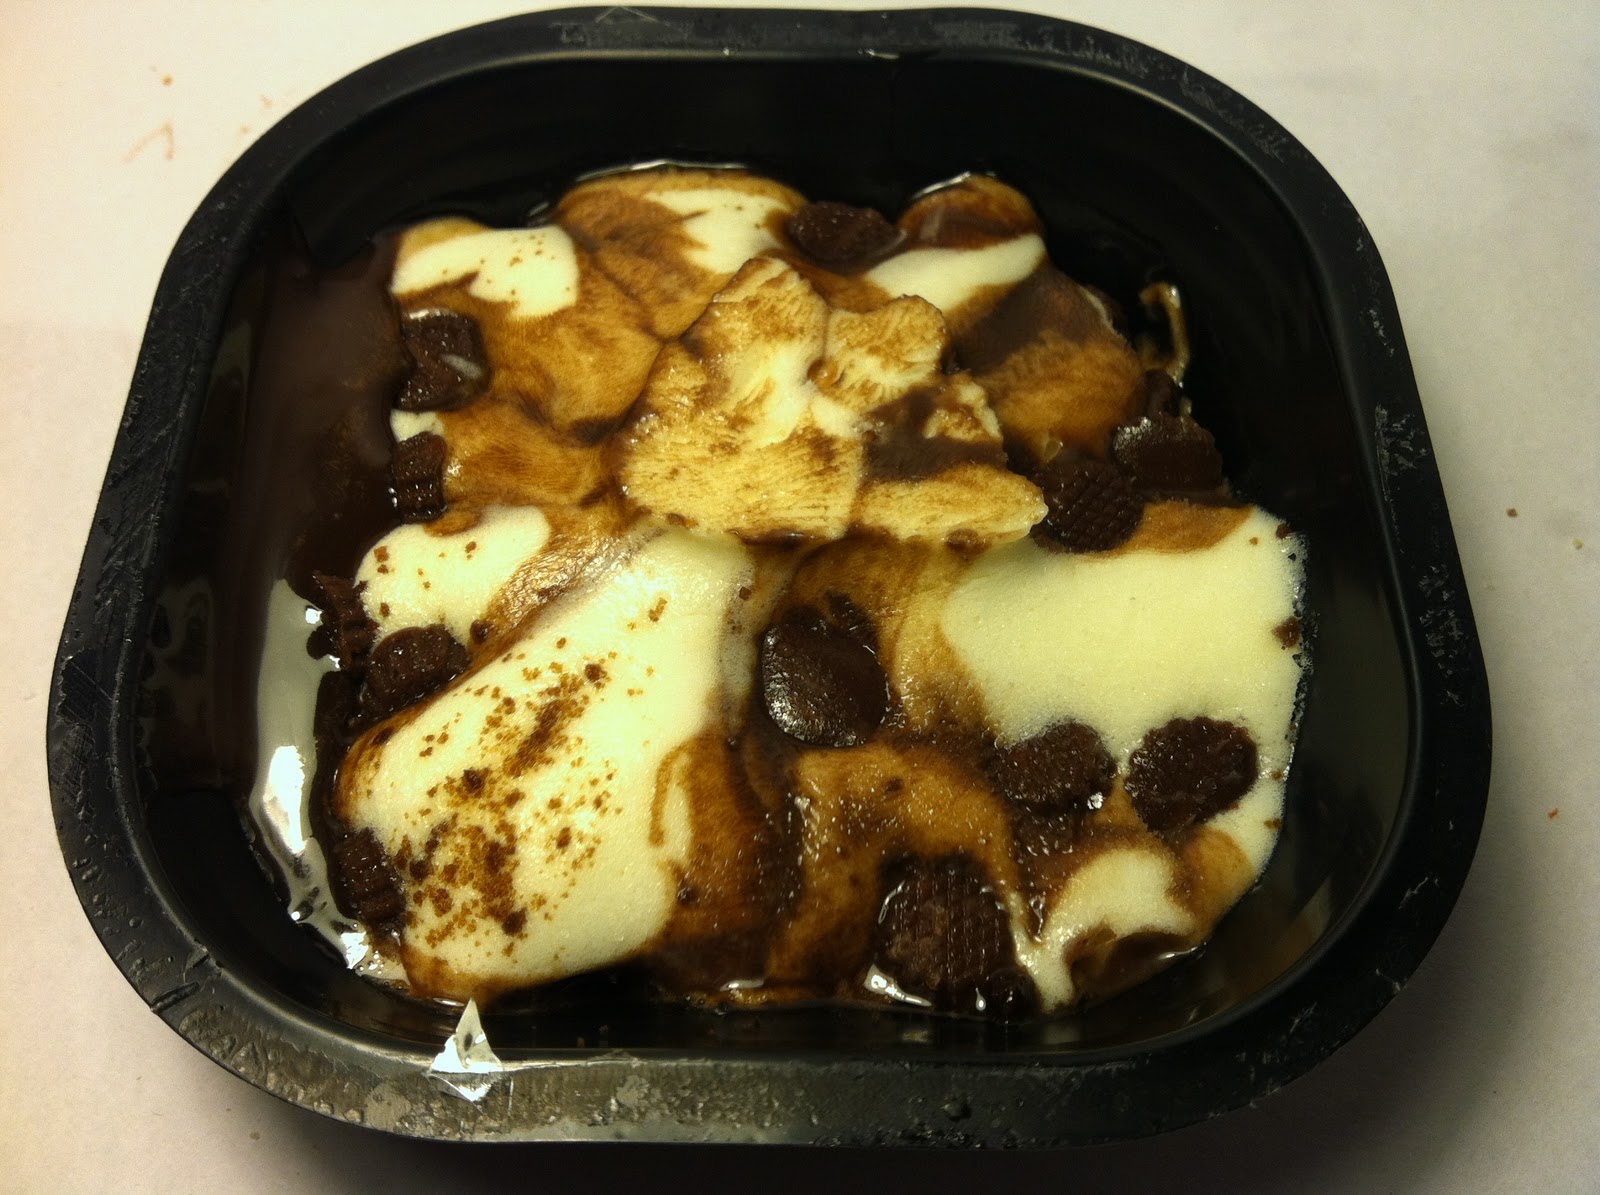 Crazy Food Dude Review Weight Watchers Smart Ones Peanut Butter Cup Sundae